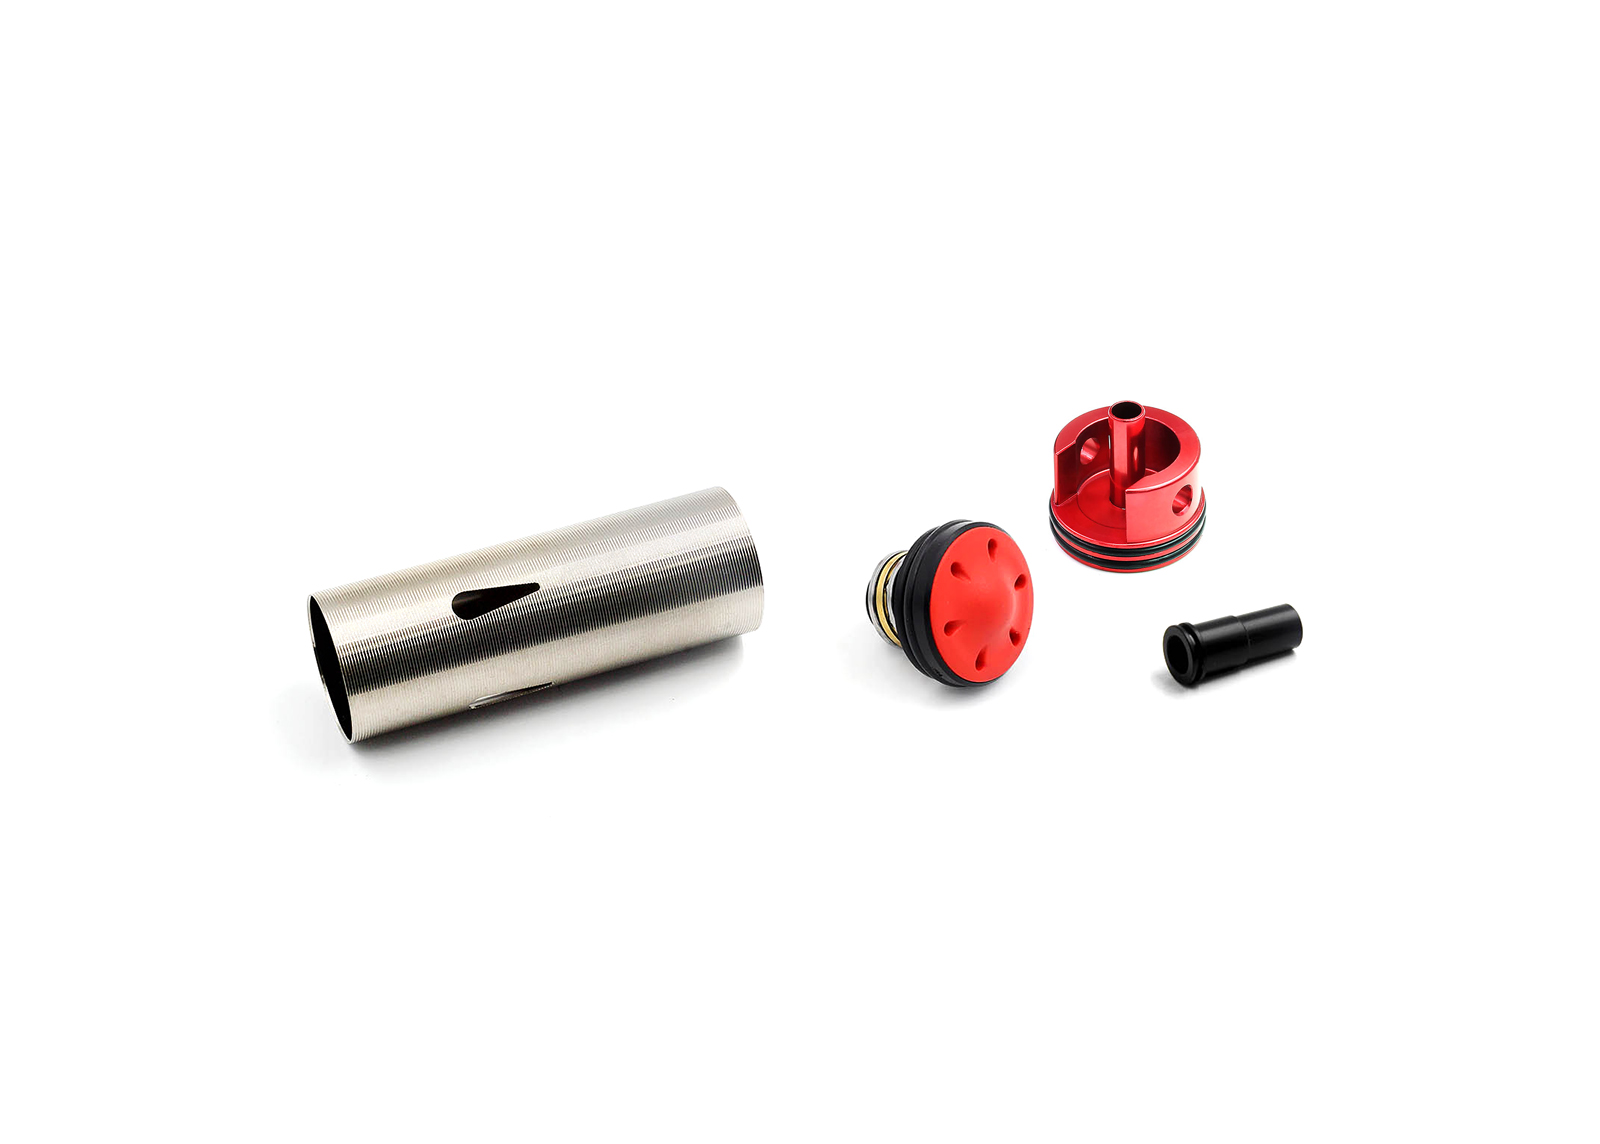 Bore-Up Cylinder Set for MP5-A4/A5/SD5/SD6 - Modify Airsoft parts